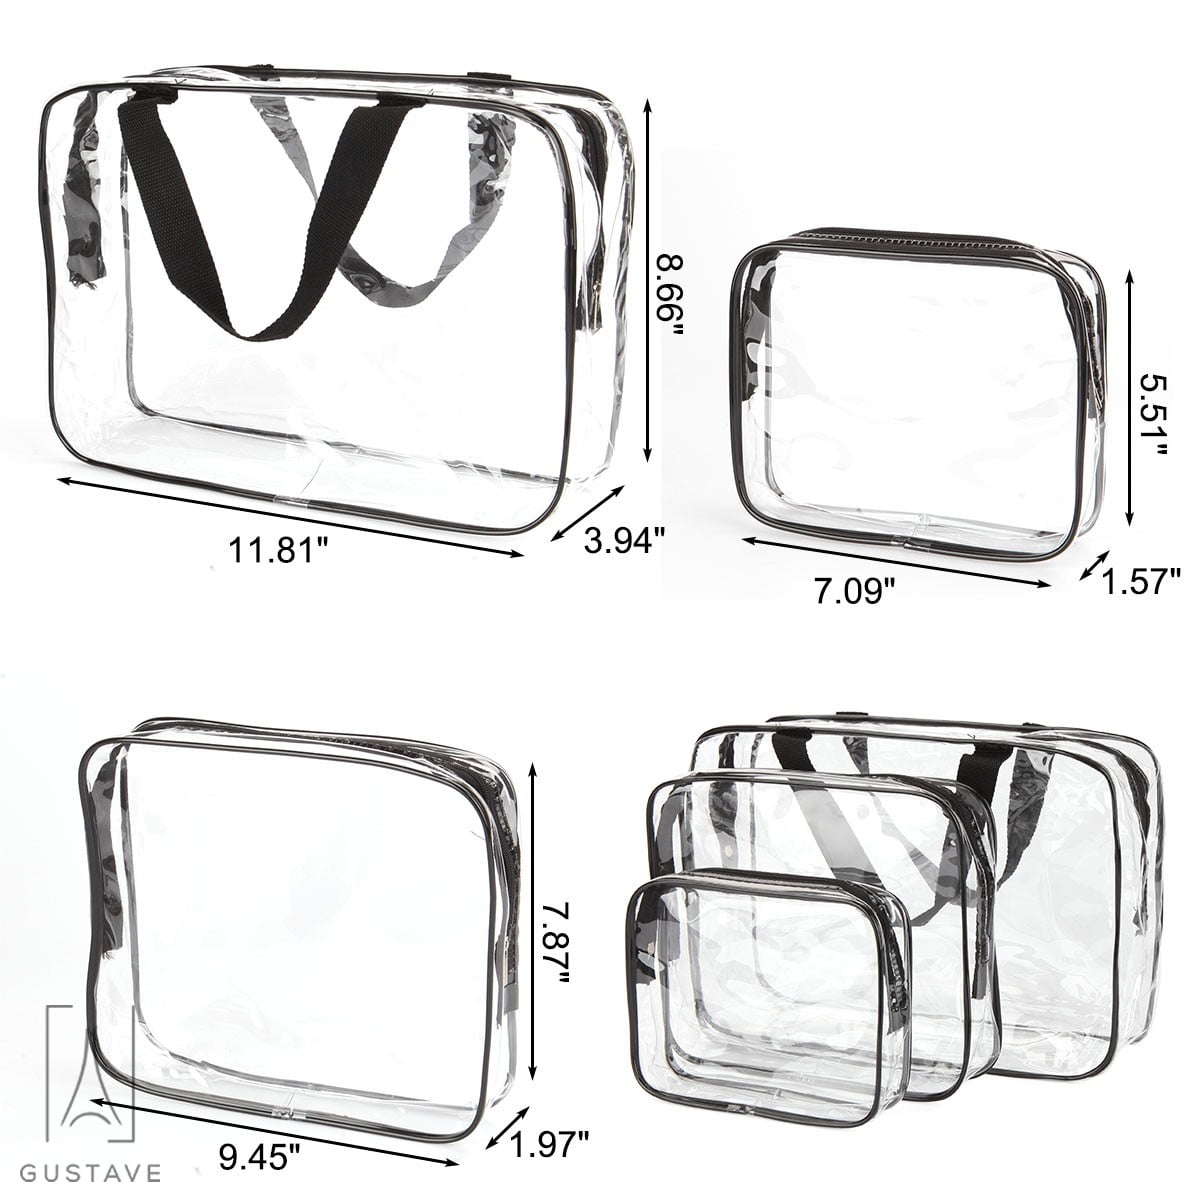 Clear Vinyl Toiletry Bag w/ Leatherette Accent (HP1115)